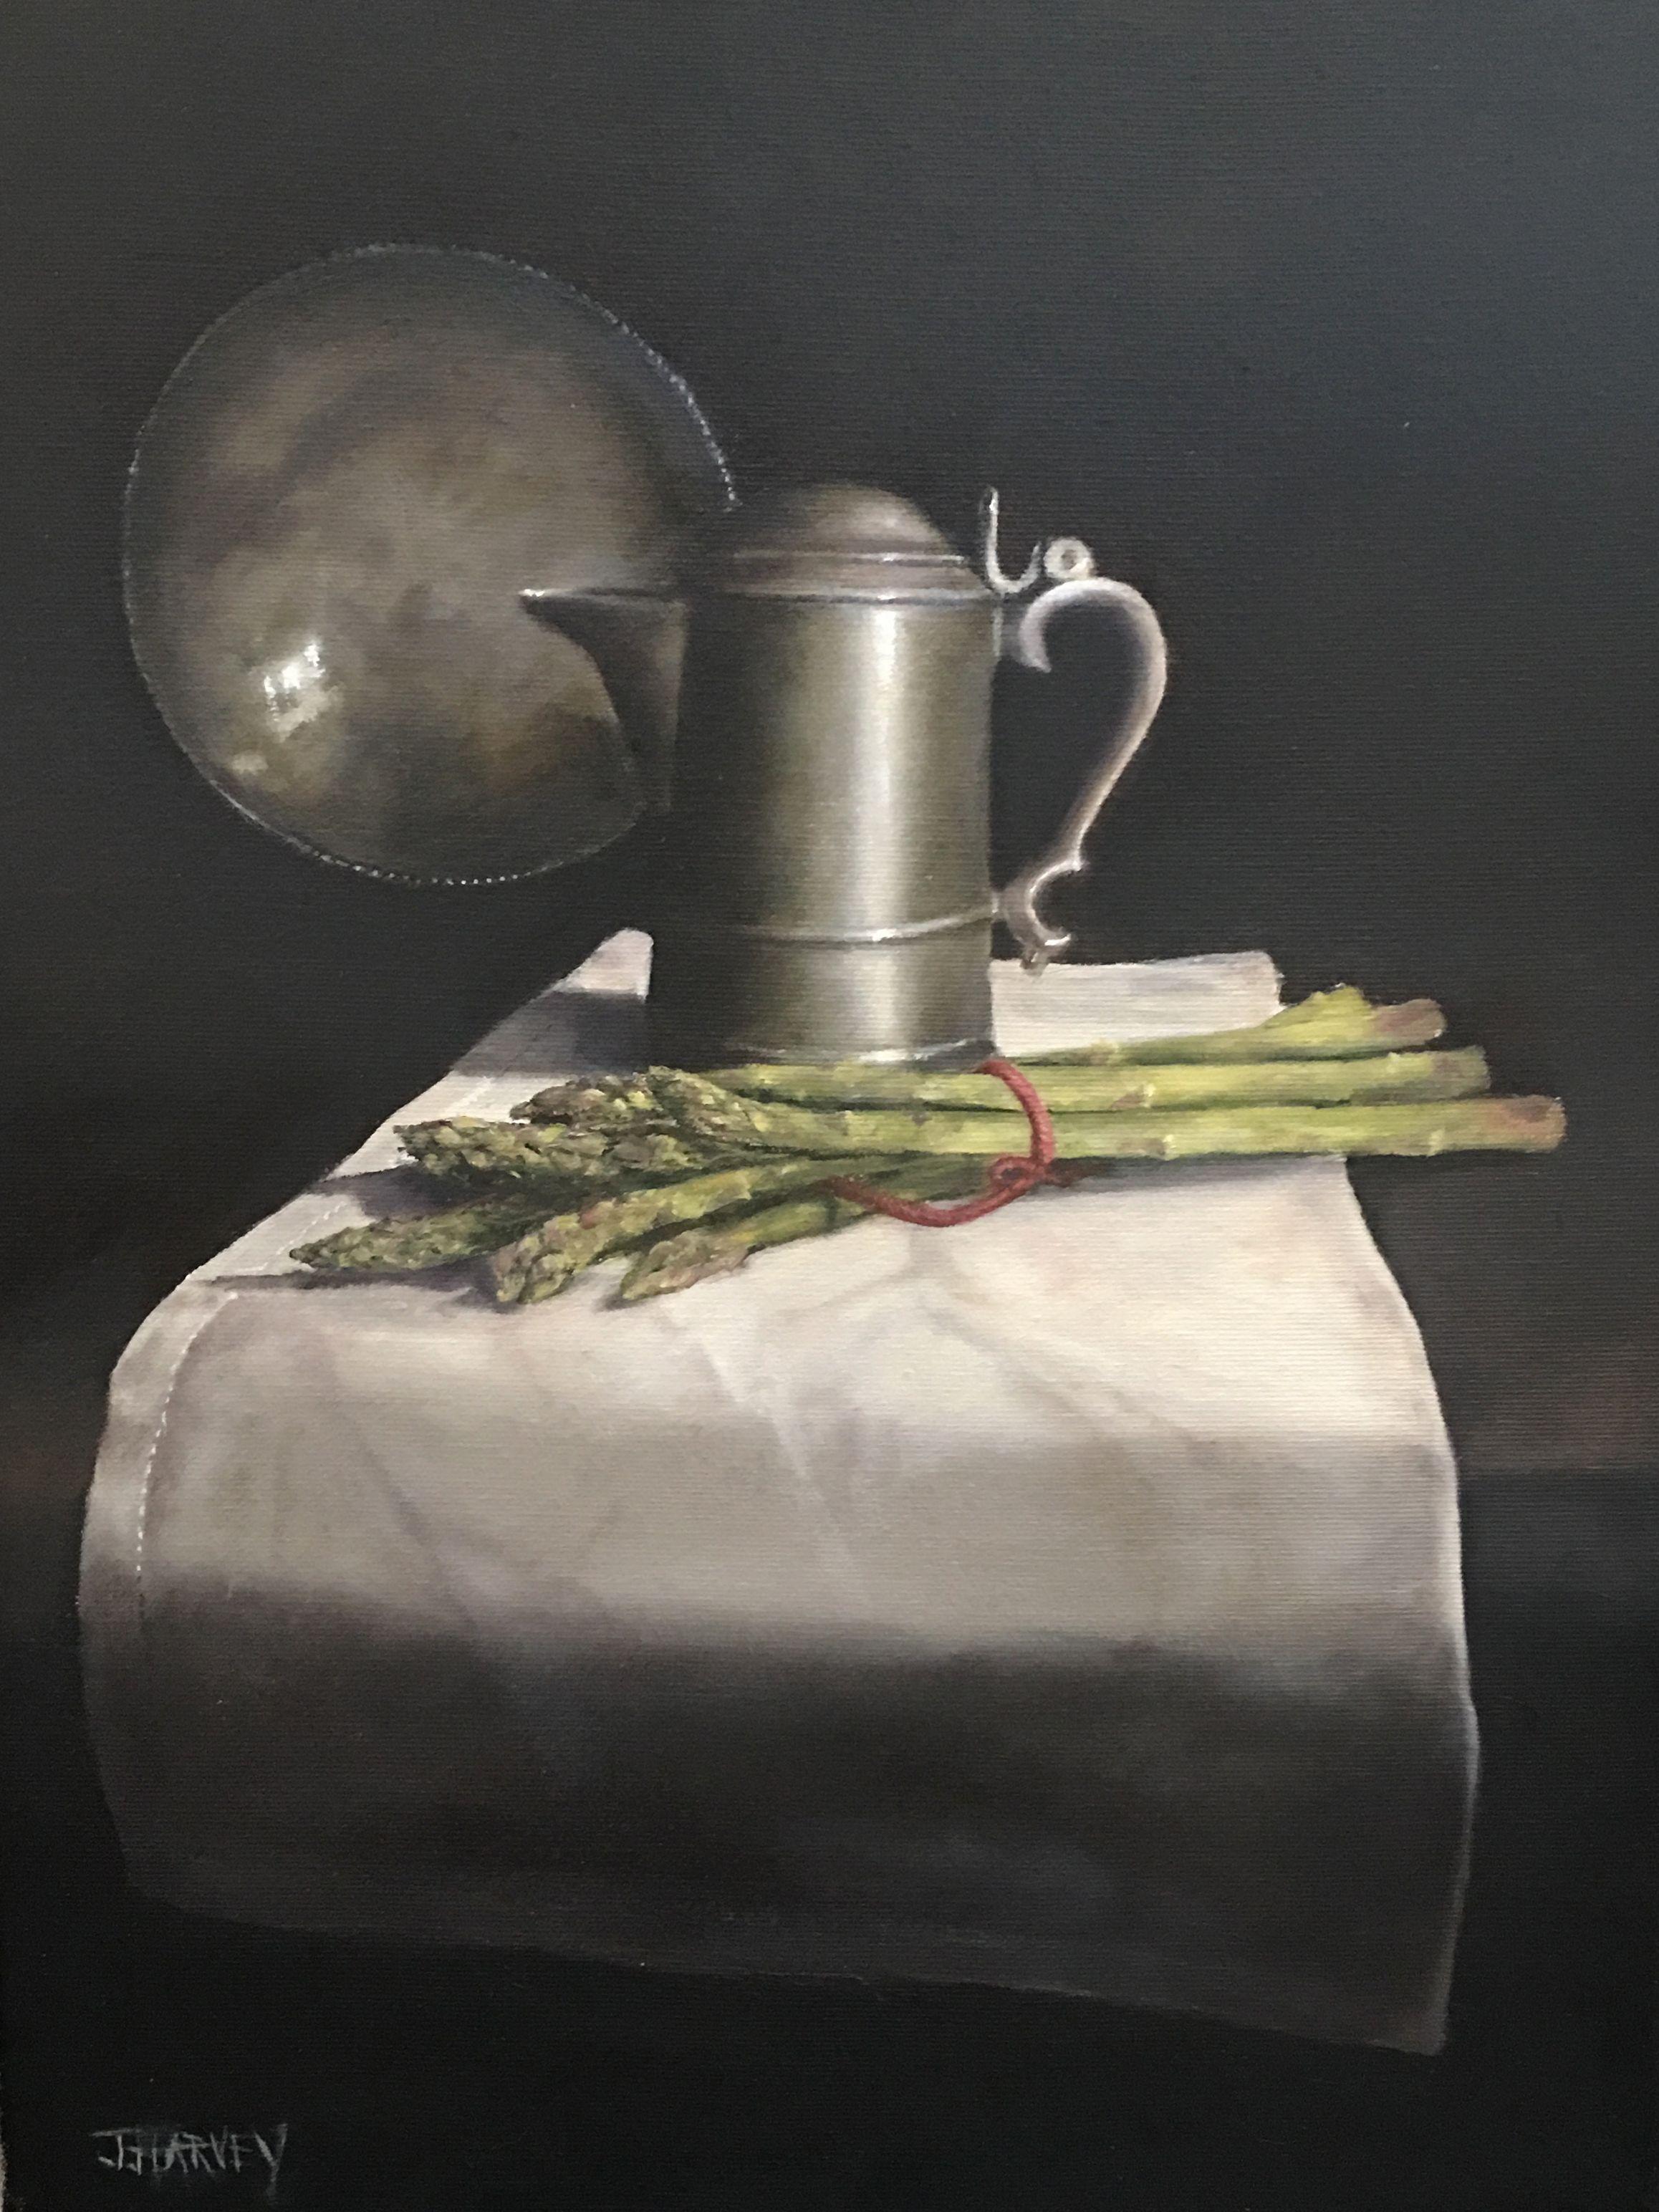 Textures, sheen, reflections, colour â€“ all are rendered very simply in this work. A pewter stein is high lighted along with fresh green asparagus and a battered pewter plate as a backdrop. The string in the original setup was white, but the